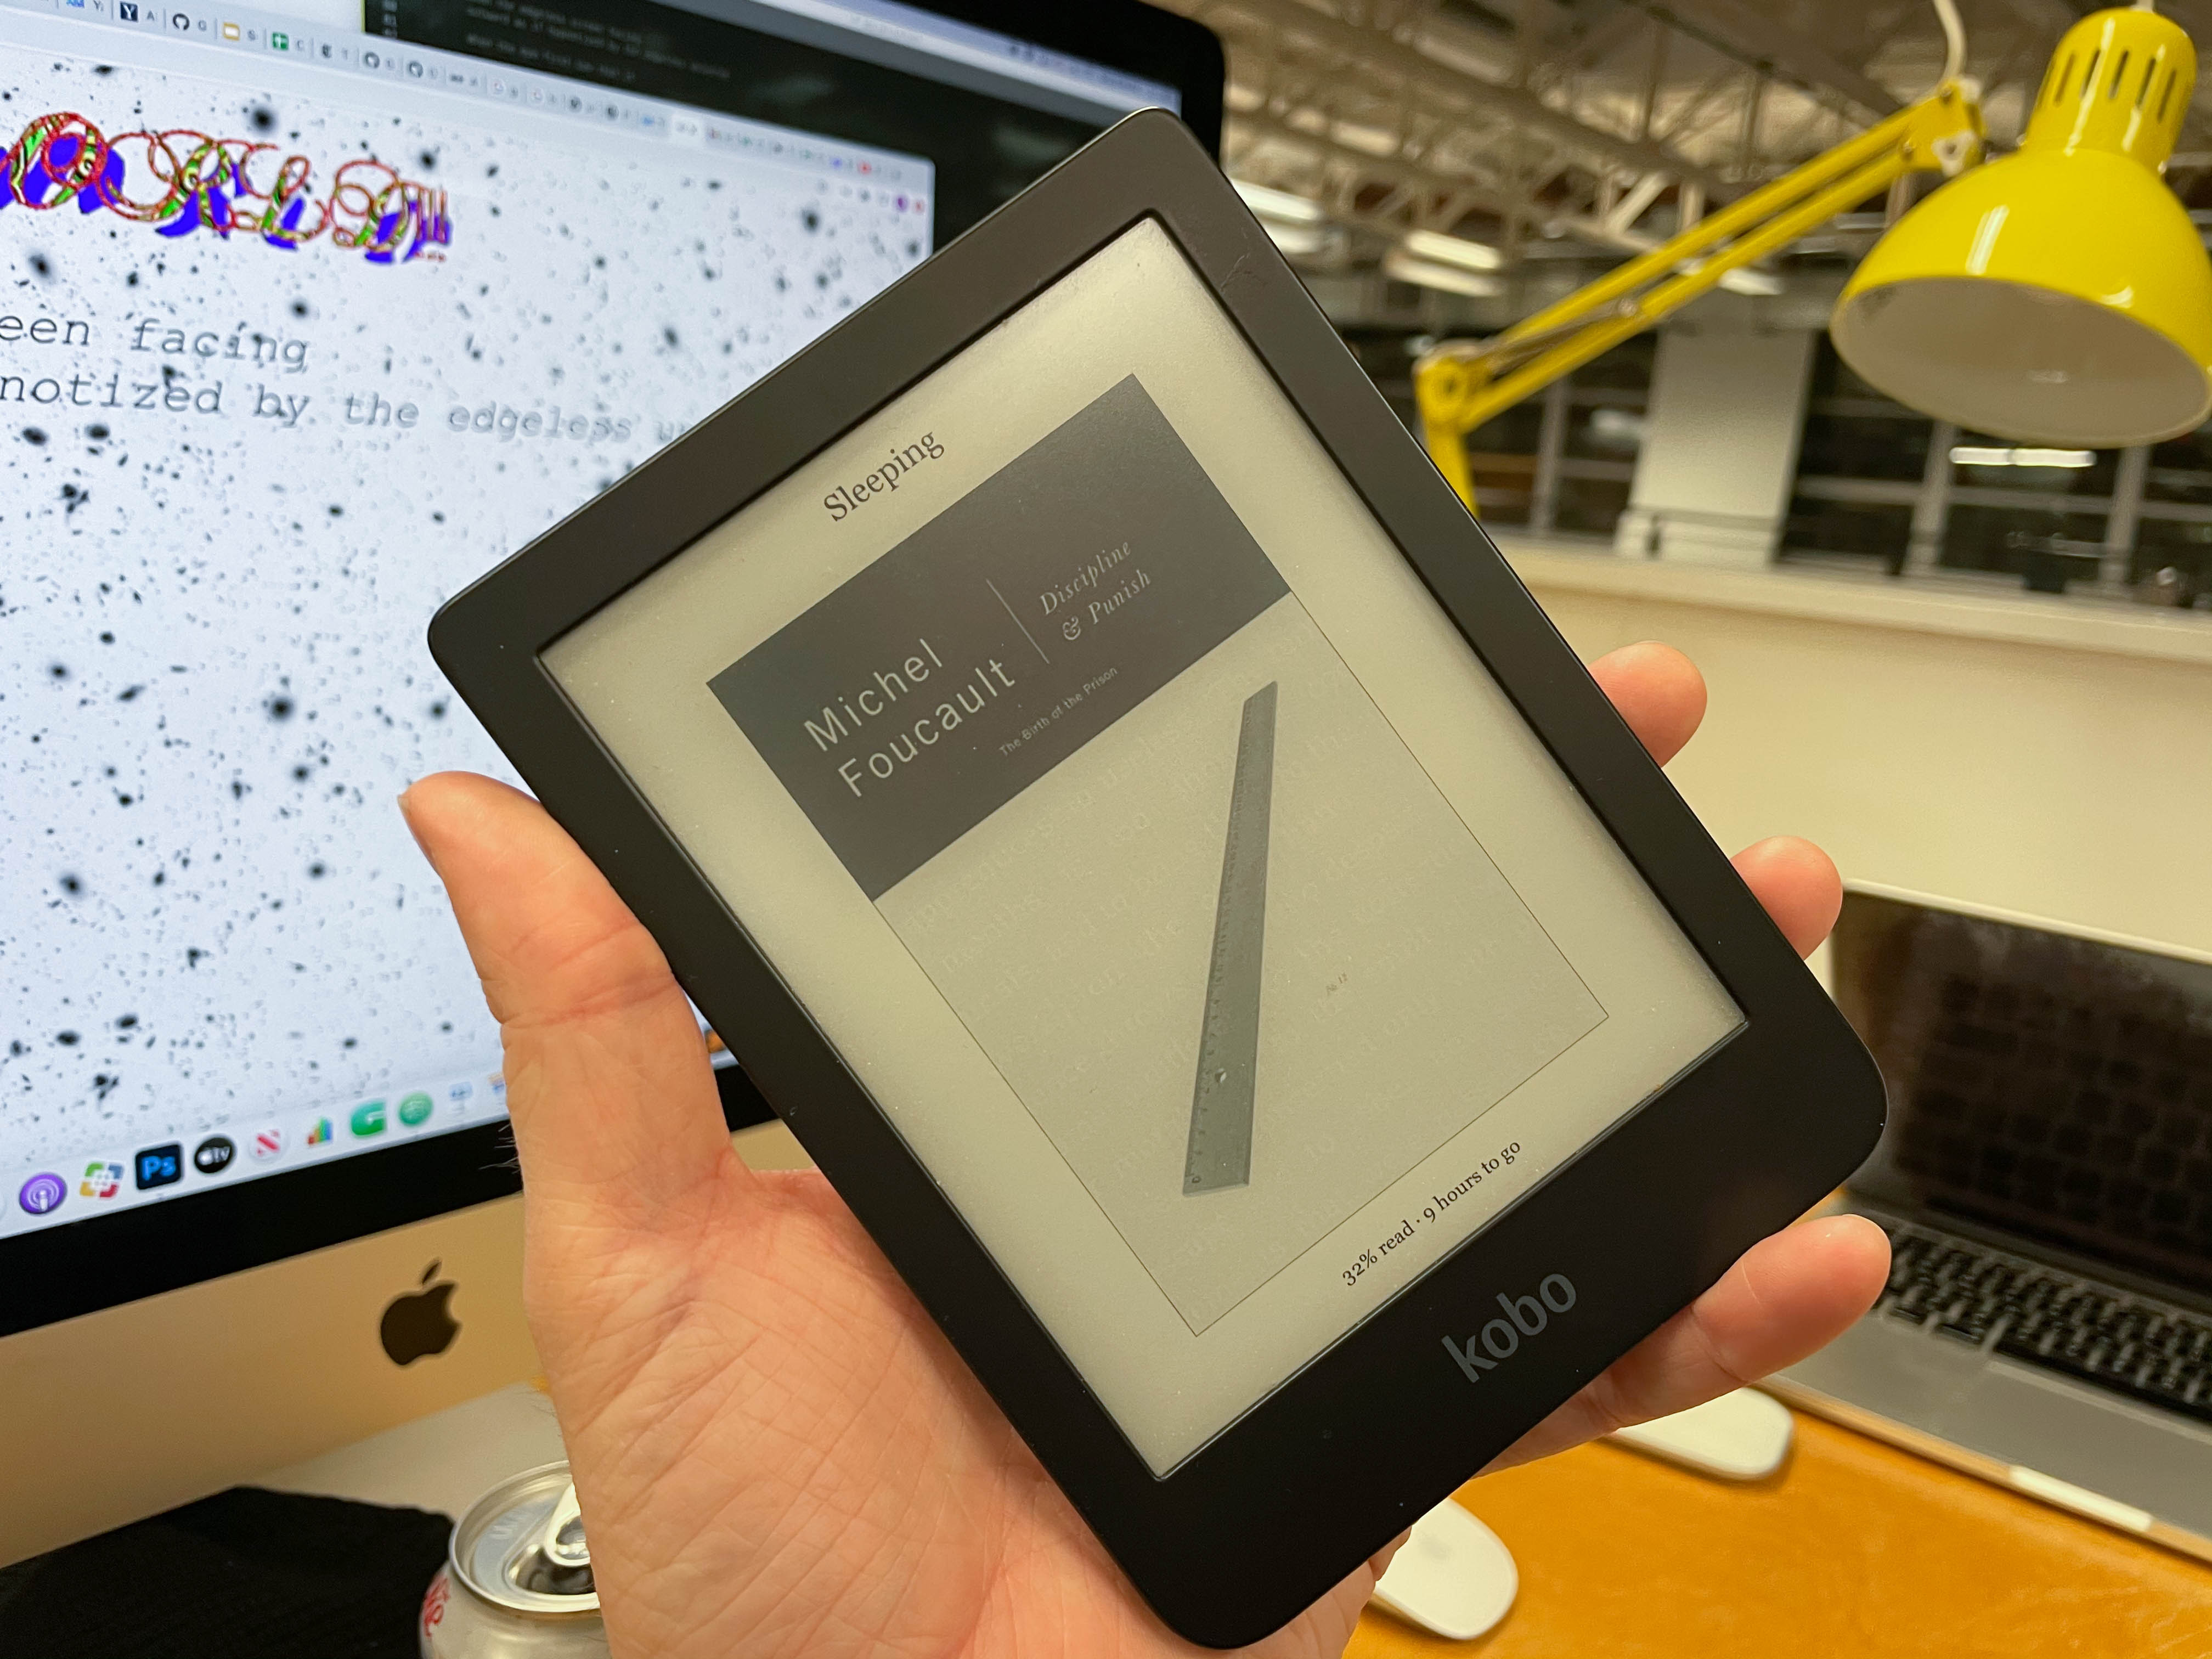 A kobo clara HD heald in from of a desk with a monitor display this very website.